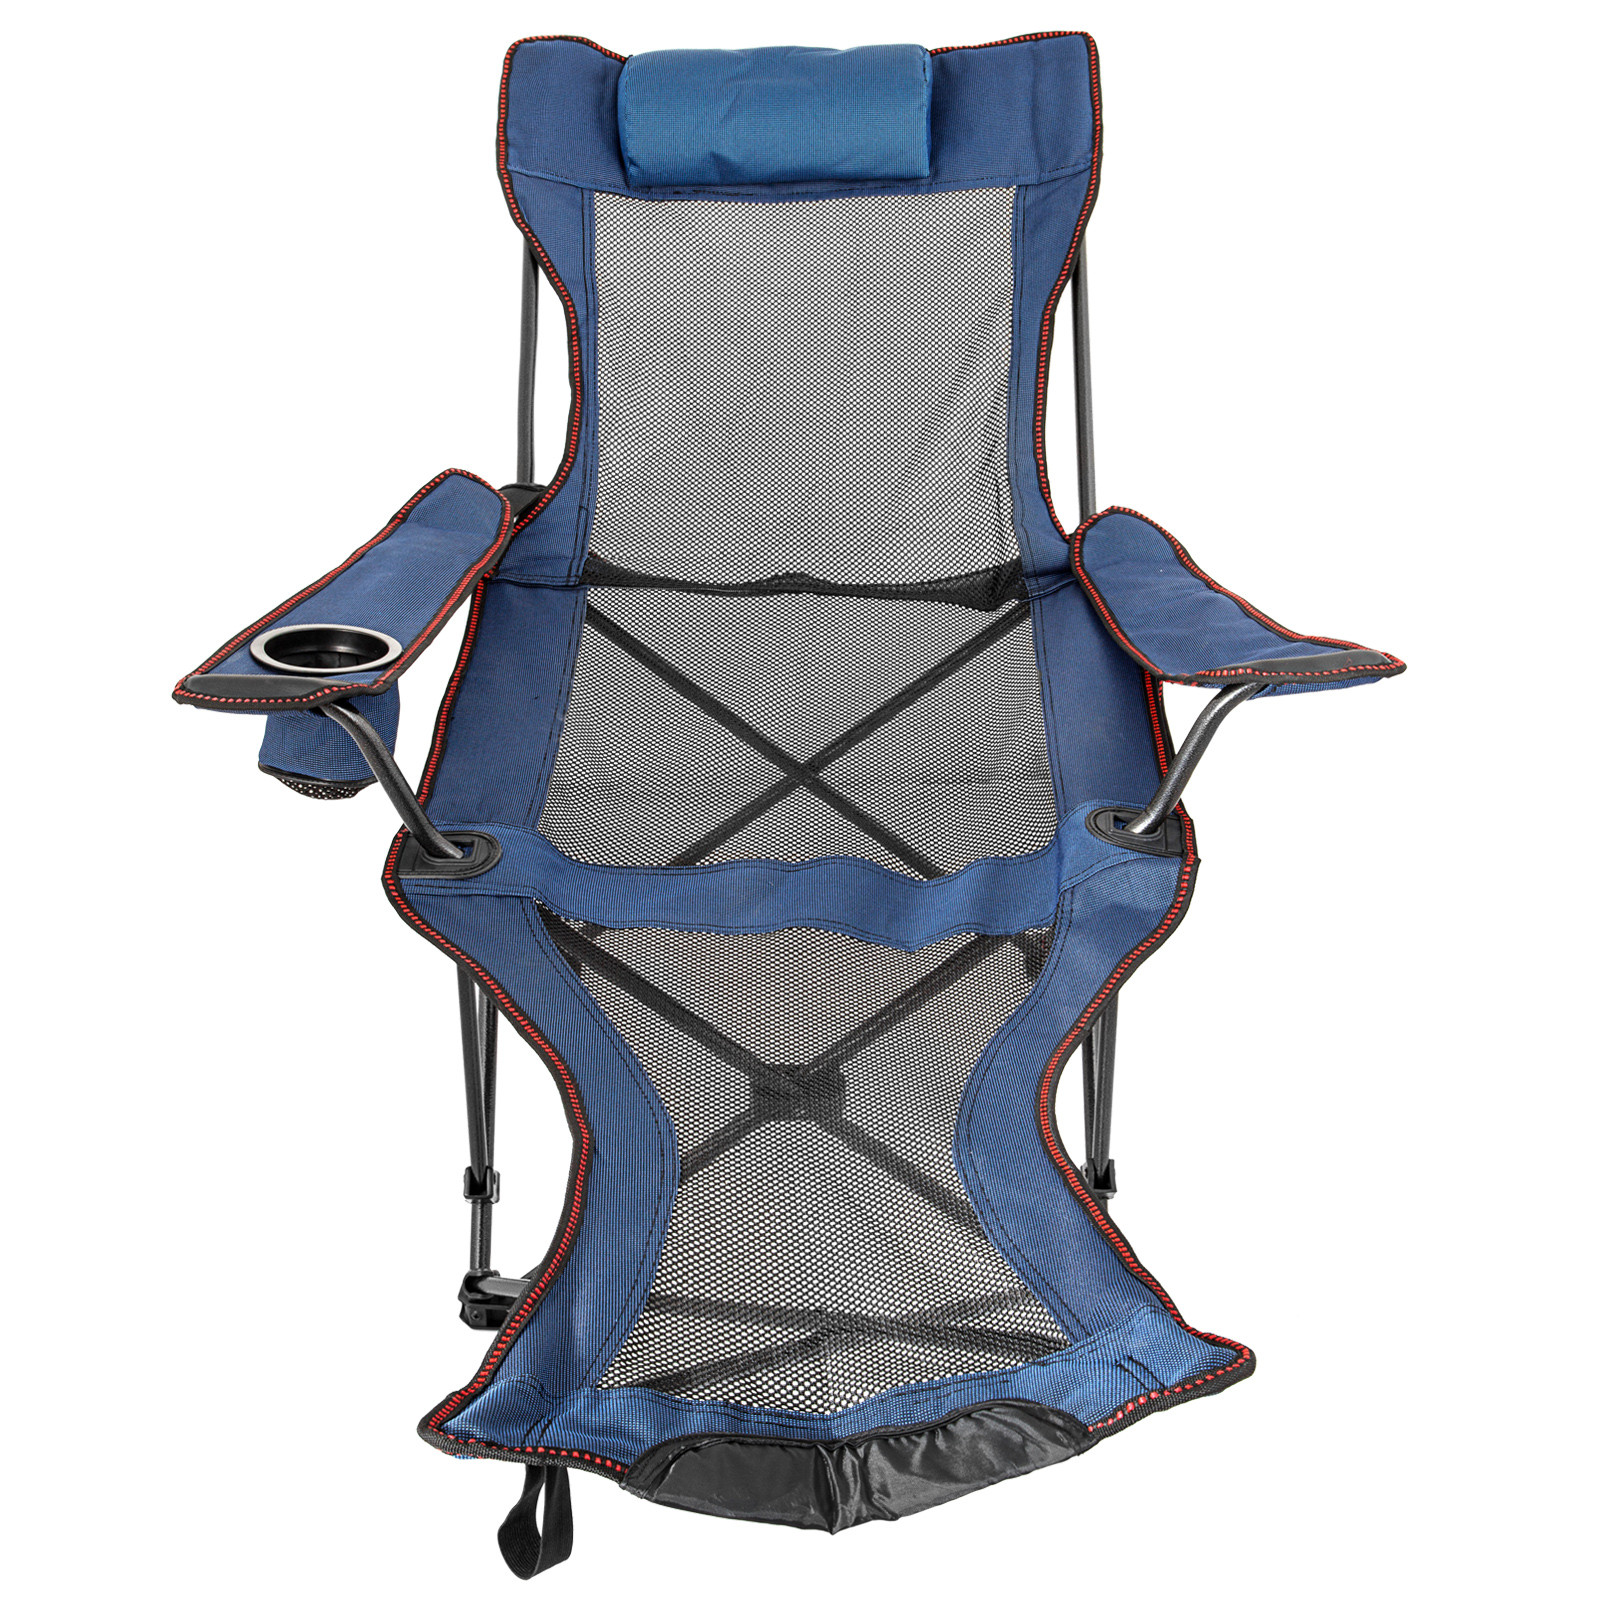 Green/Blue/Gray Reclining Folding Camp Chair W/ Footrest Lounge Gray Chaise 